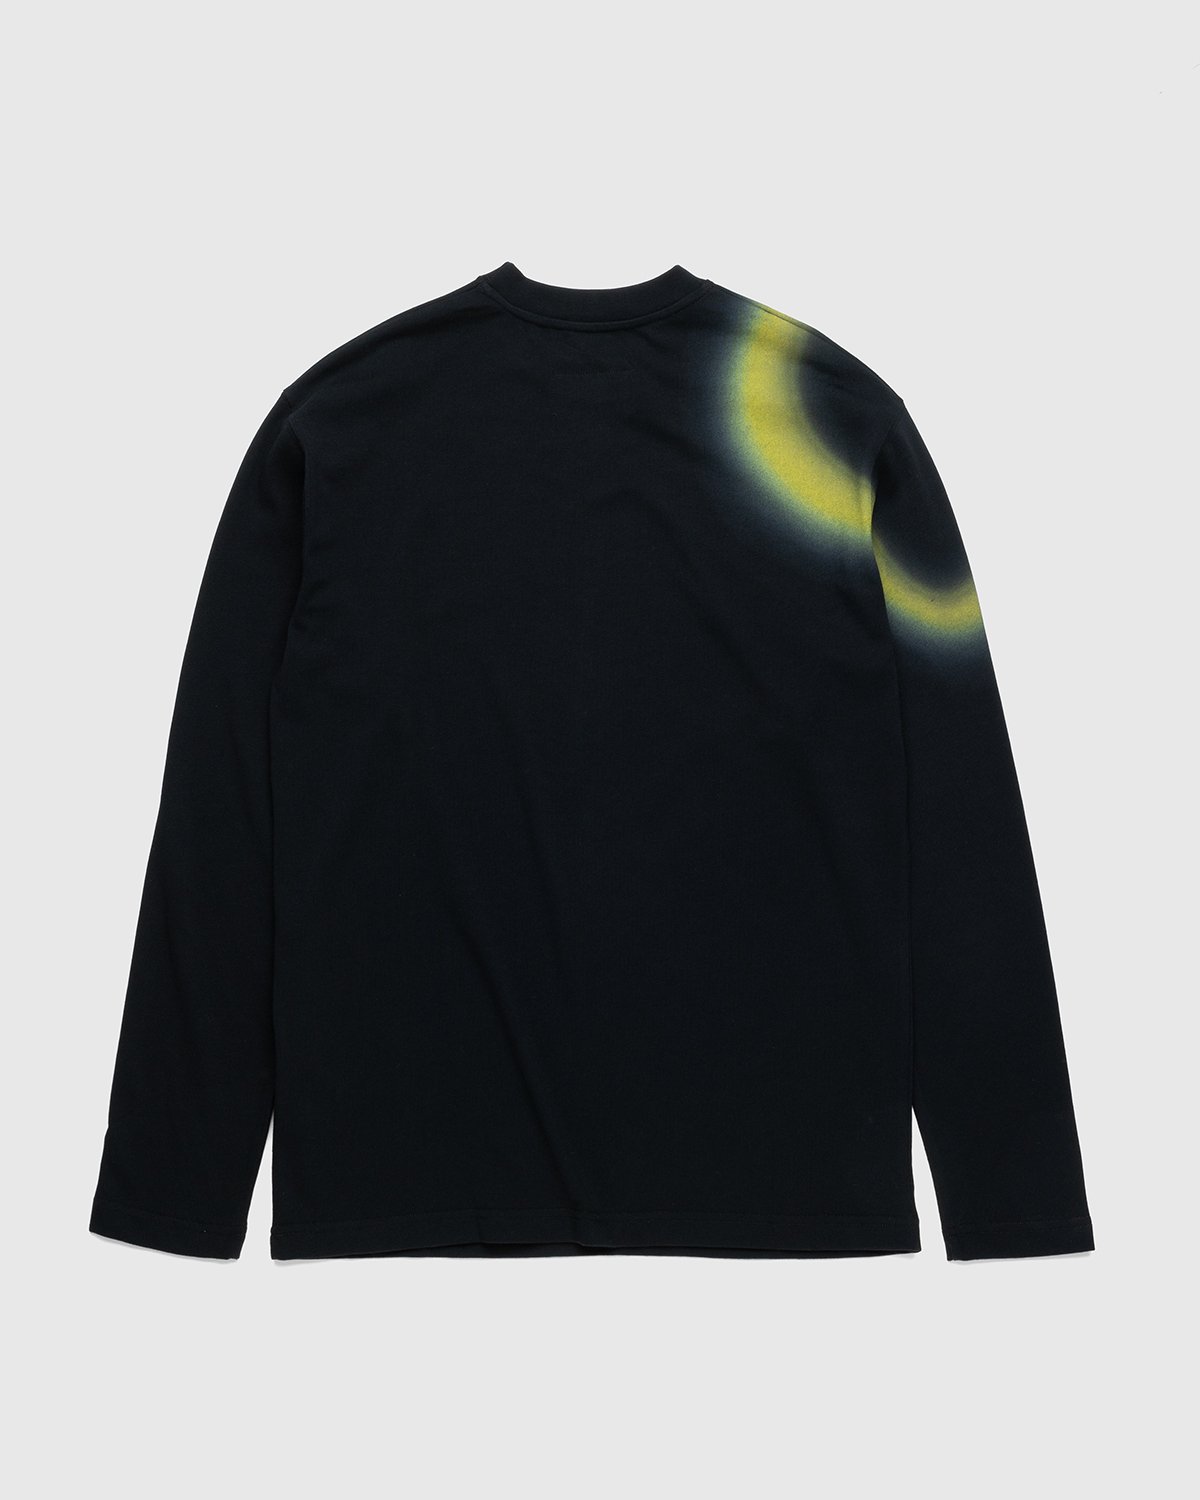 A-Cold-Wall* - Hypergraphic Longsleeve Black - Clothing - Black - Image 2